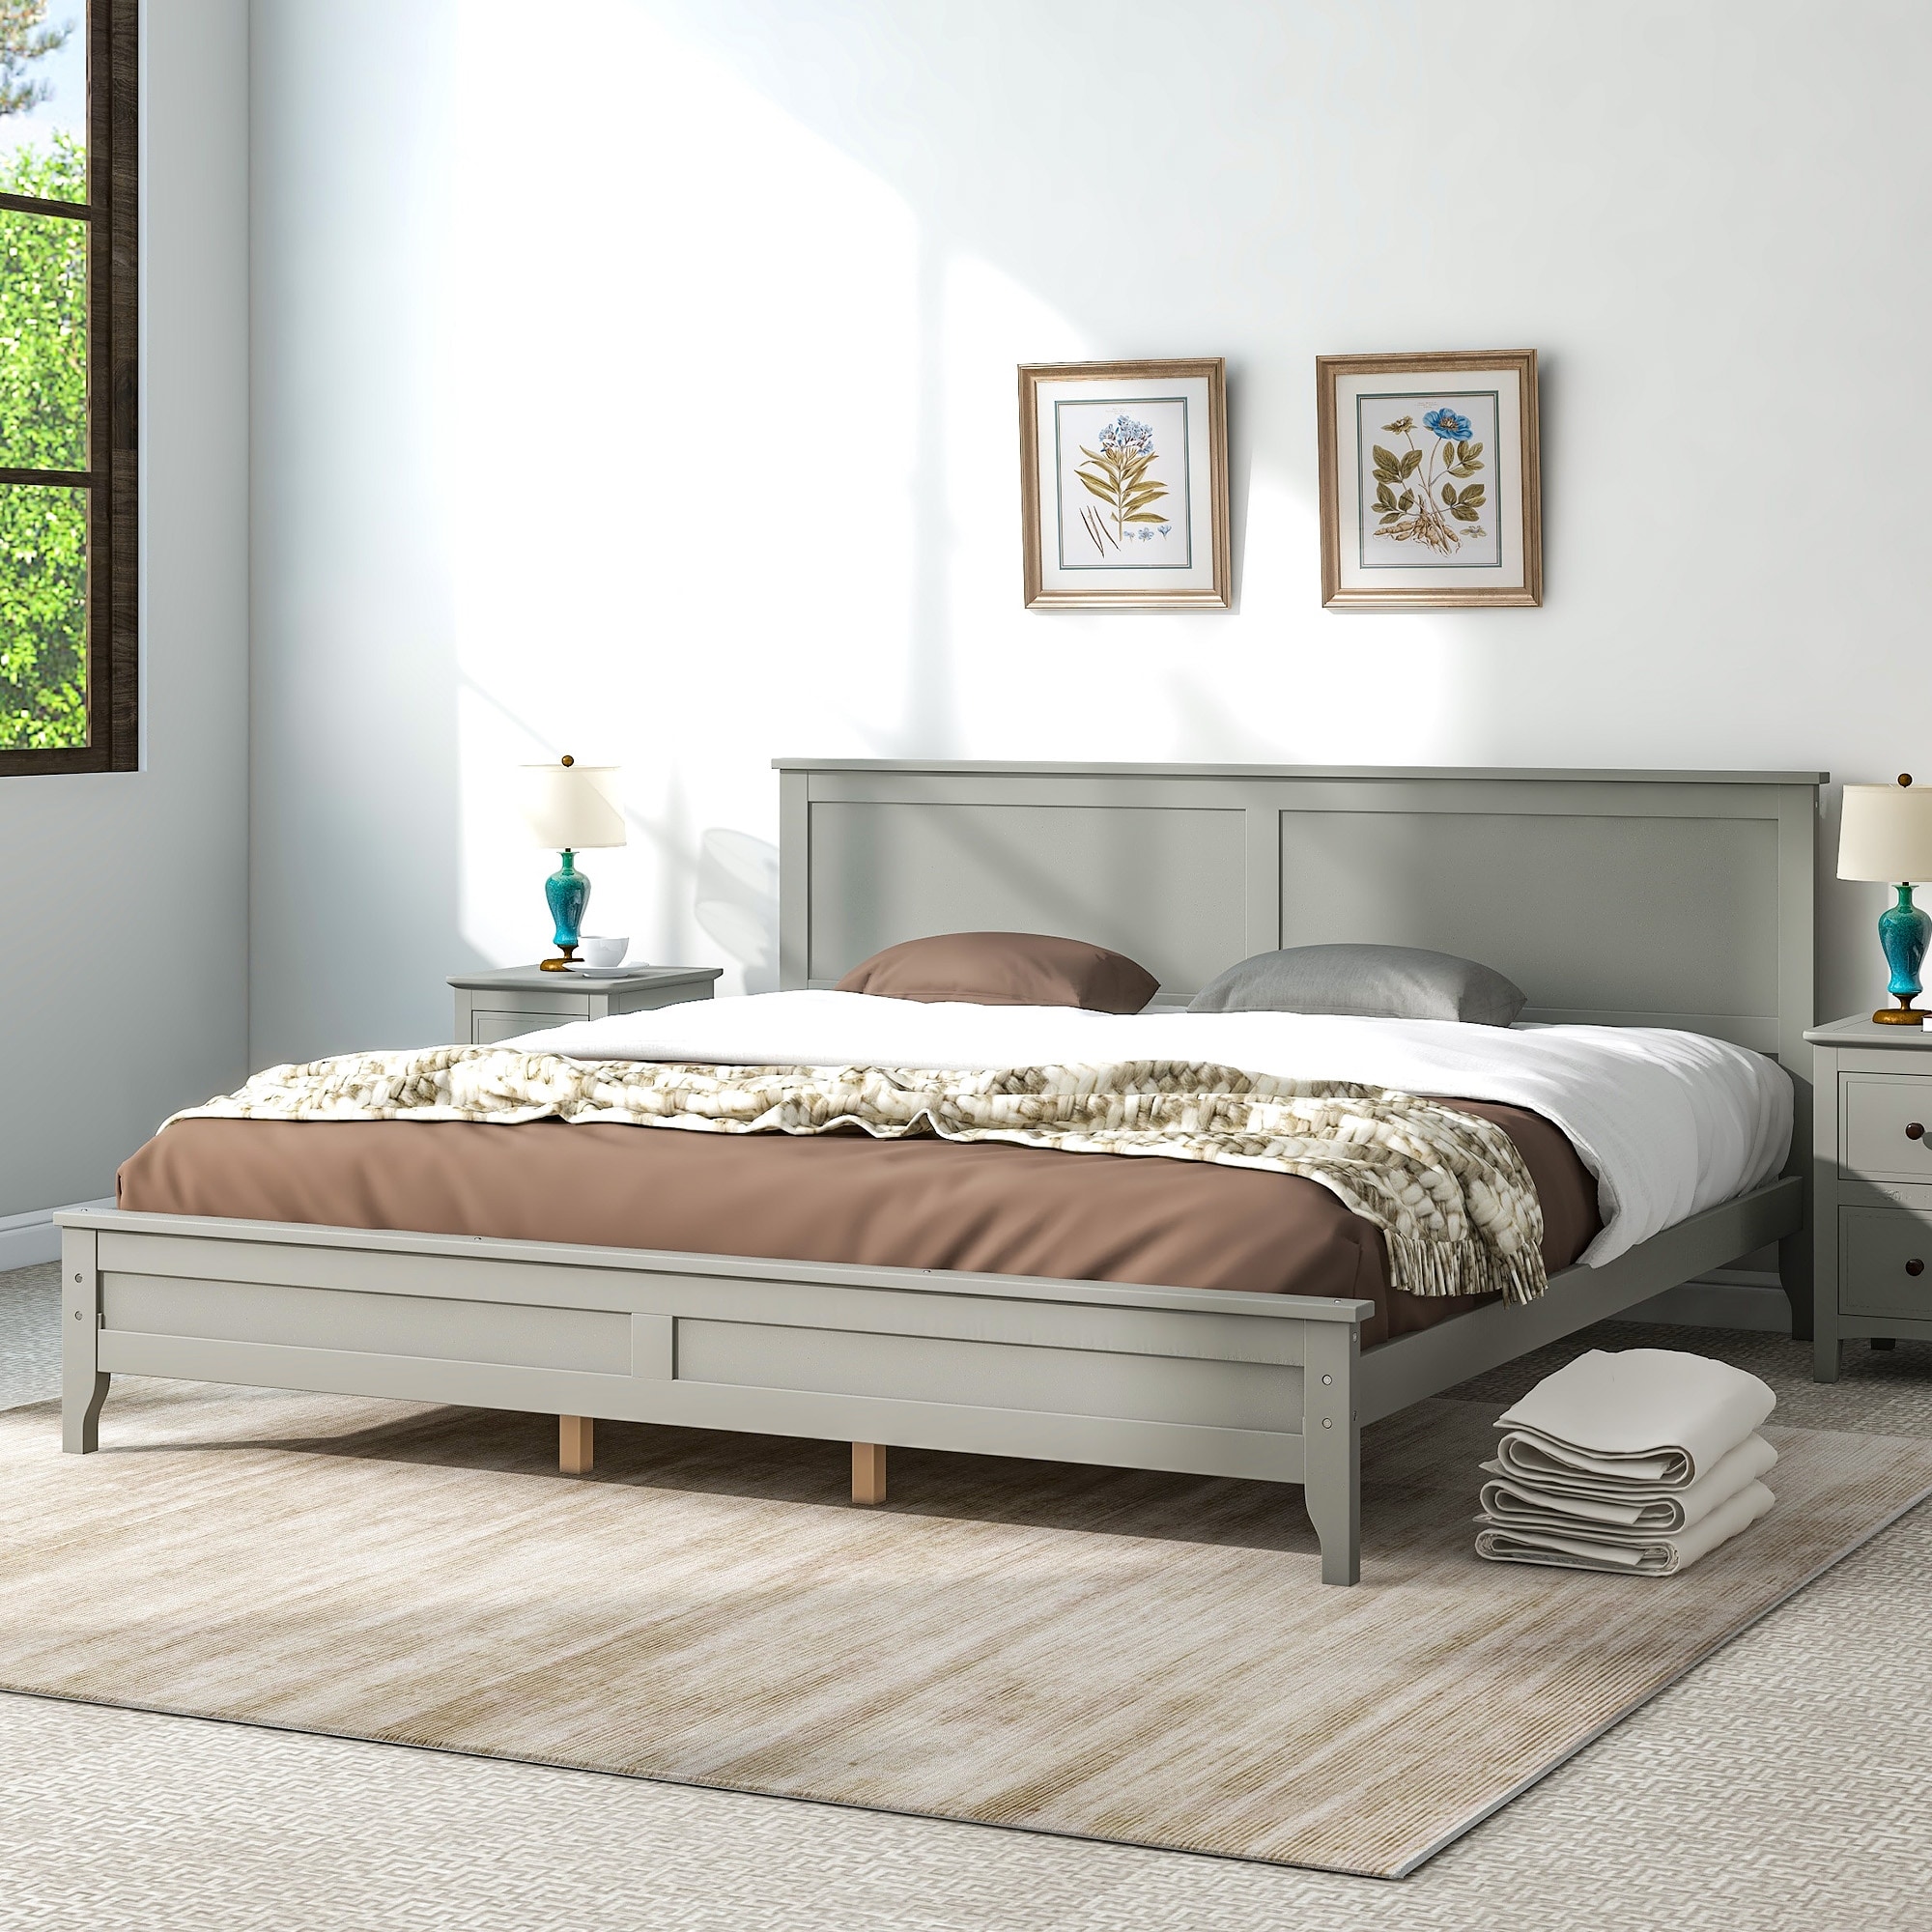 Modern Solid Wood Platform Bed With Headboard